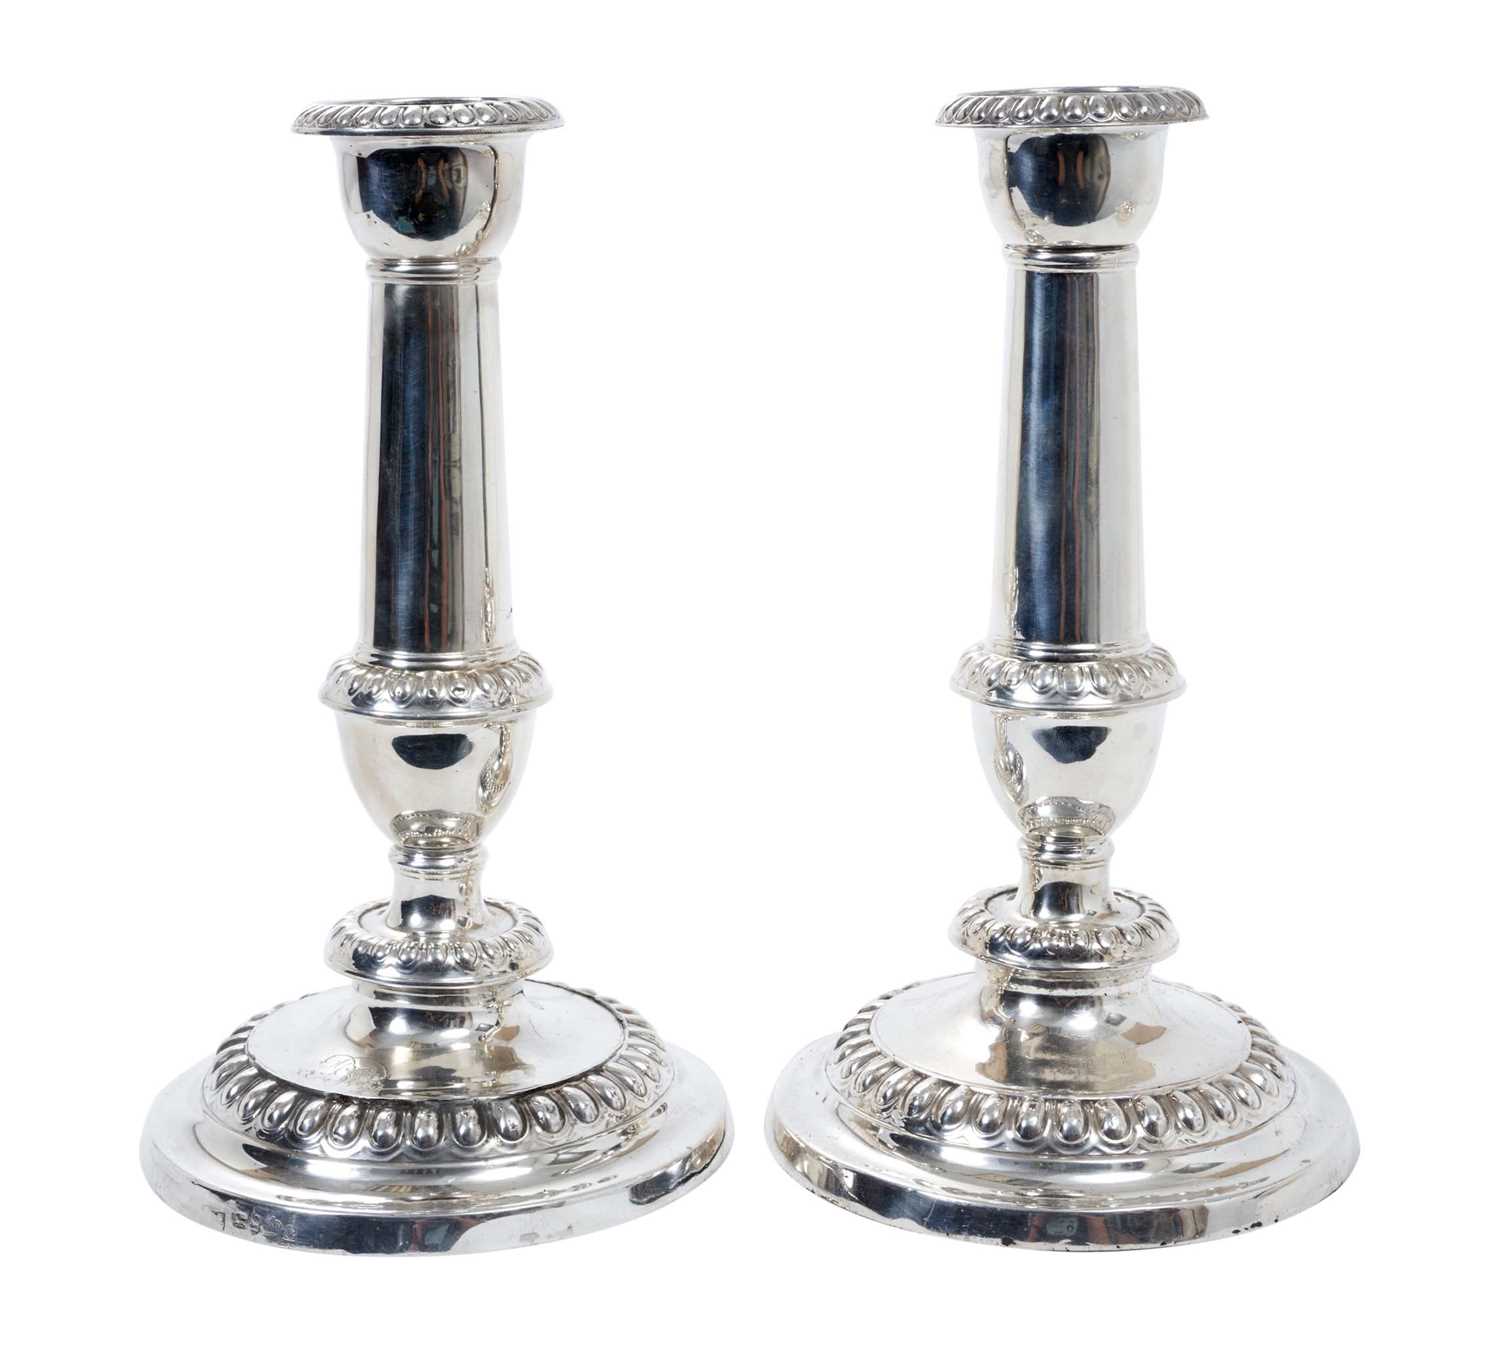 Pair of George III silver candlesticks with plain columns, removable sconces and egg and dart border